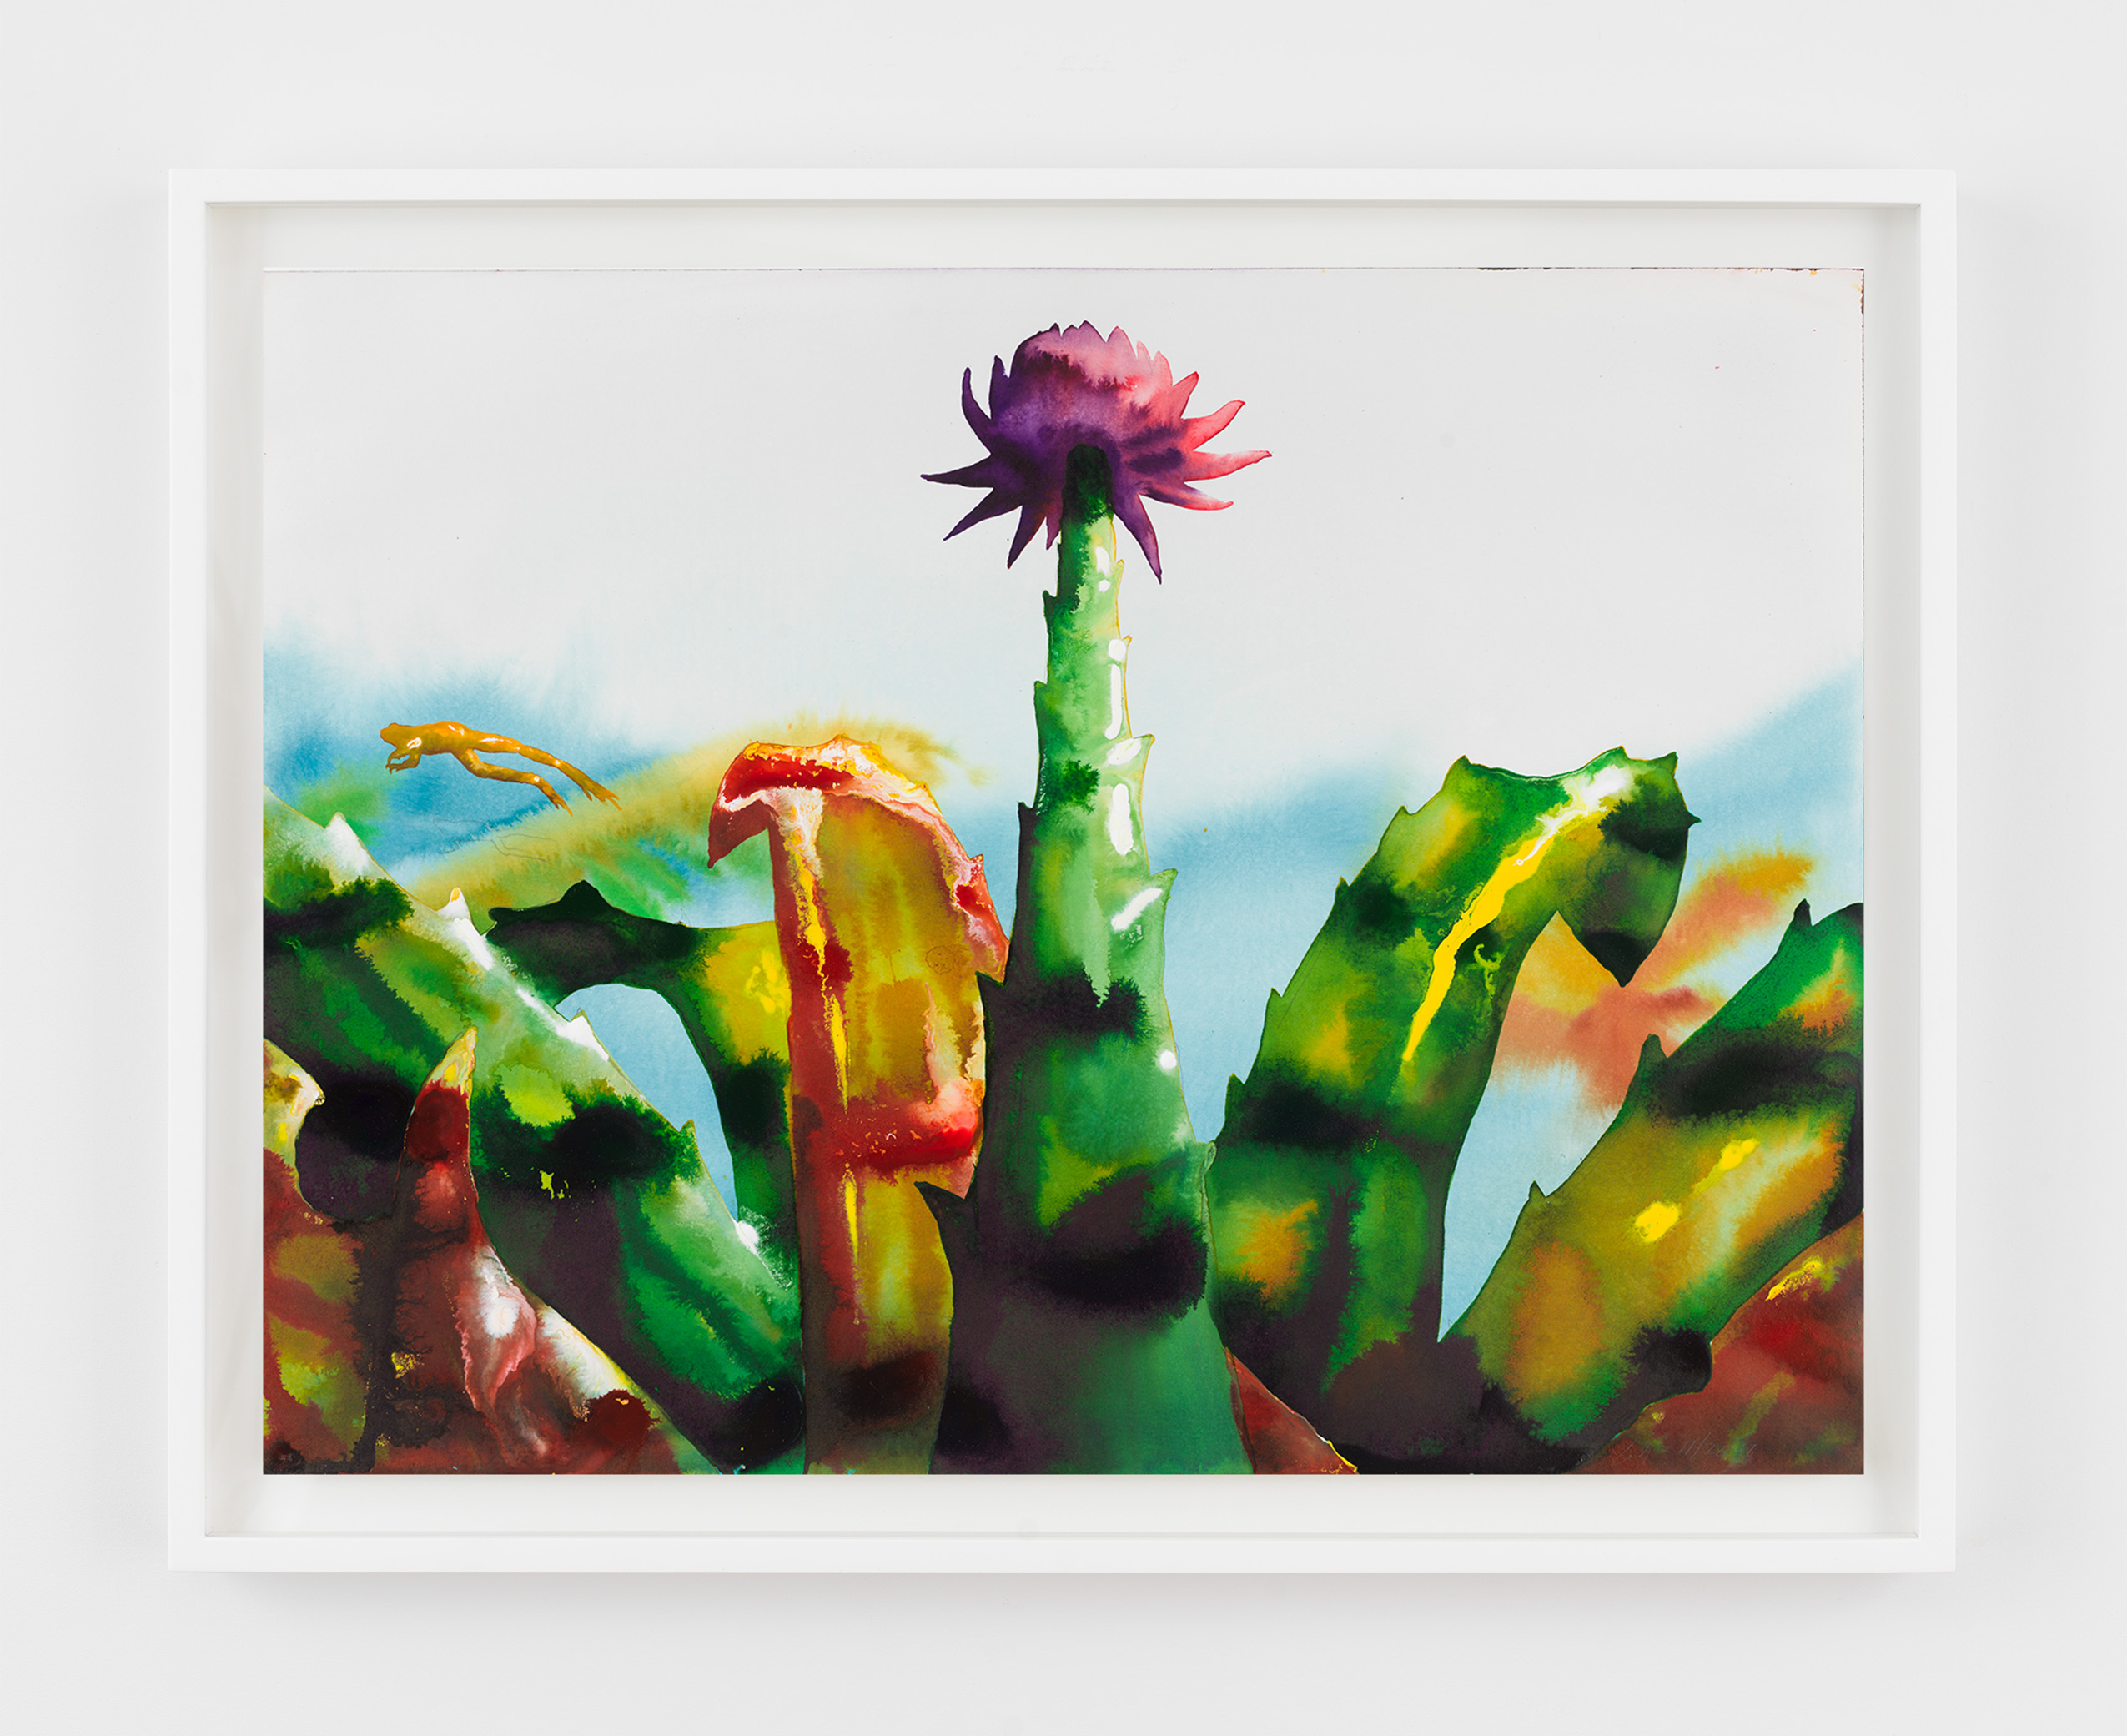 Alexis Rockman, Bromeliad, 2022, Watercolor and acrylic on paper, 18 x 24 in.